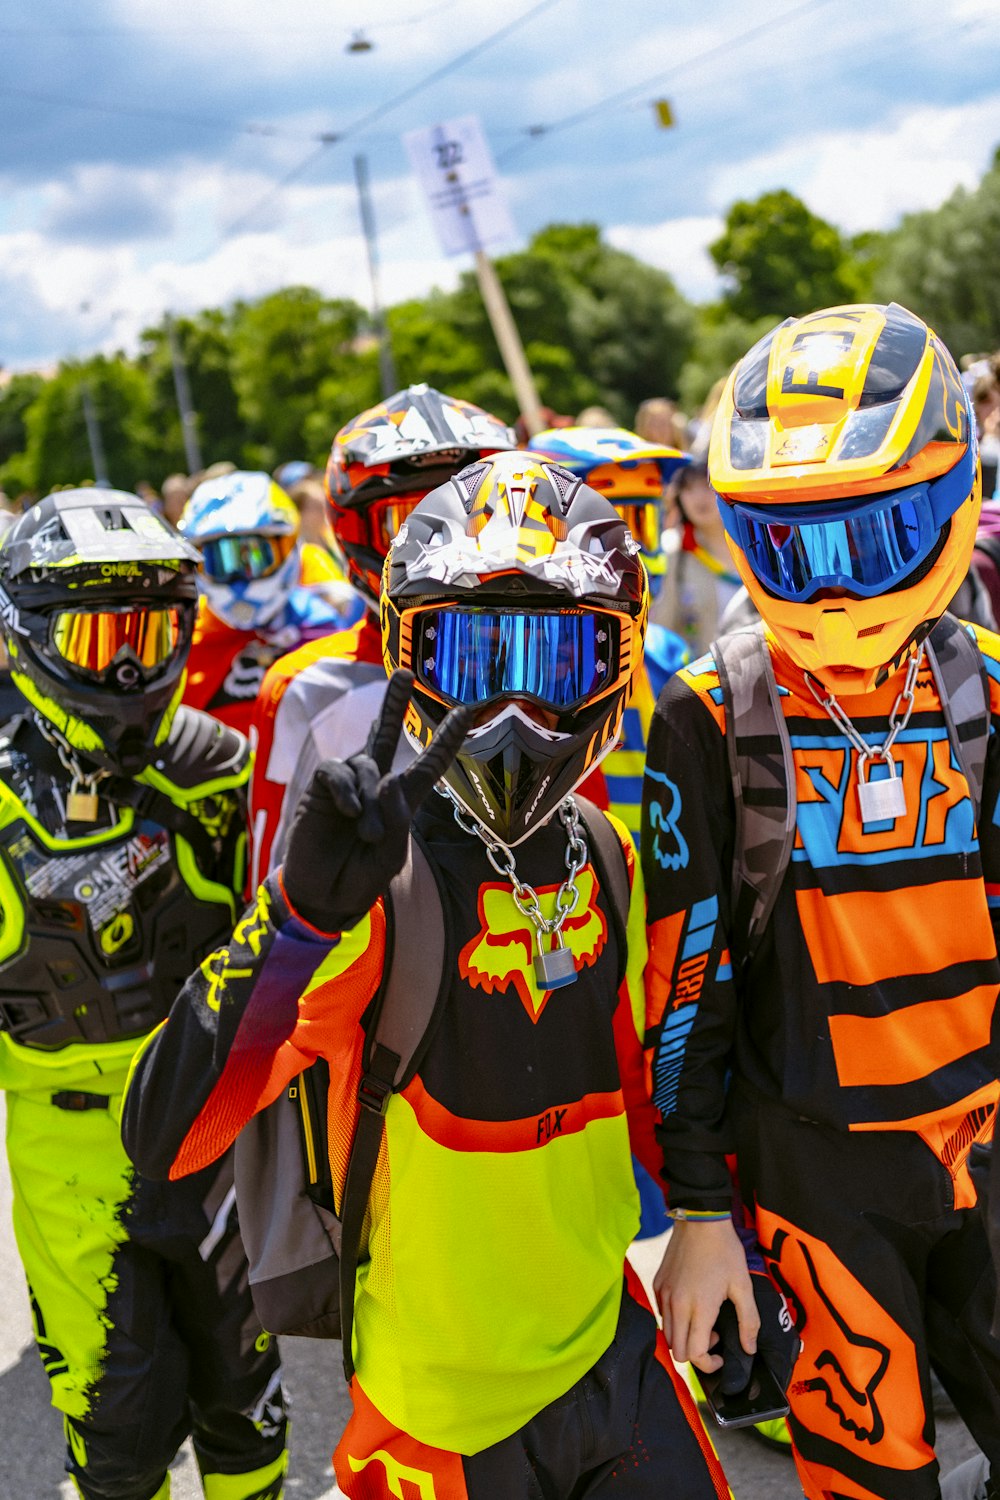 a group of people wearing helmets and protective gear